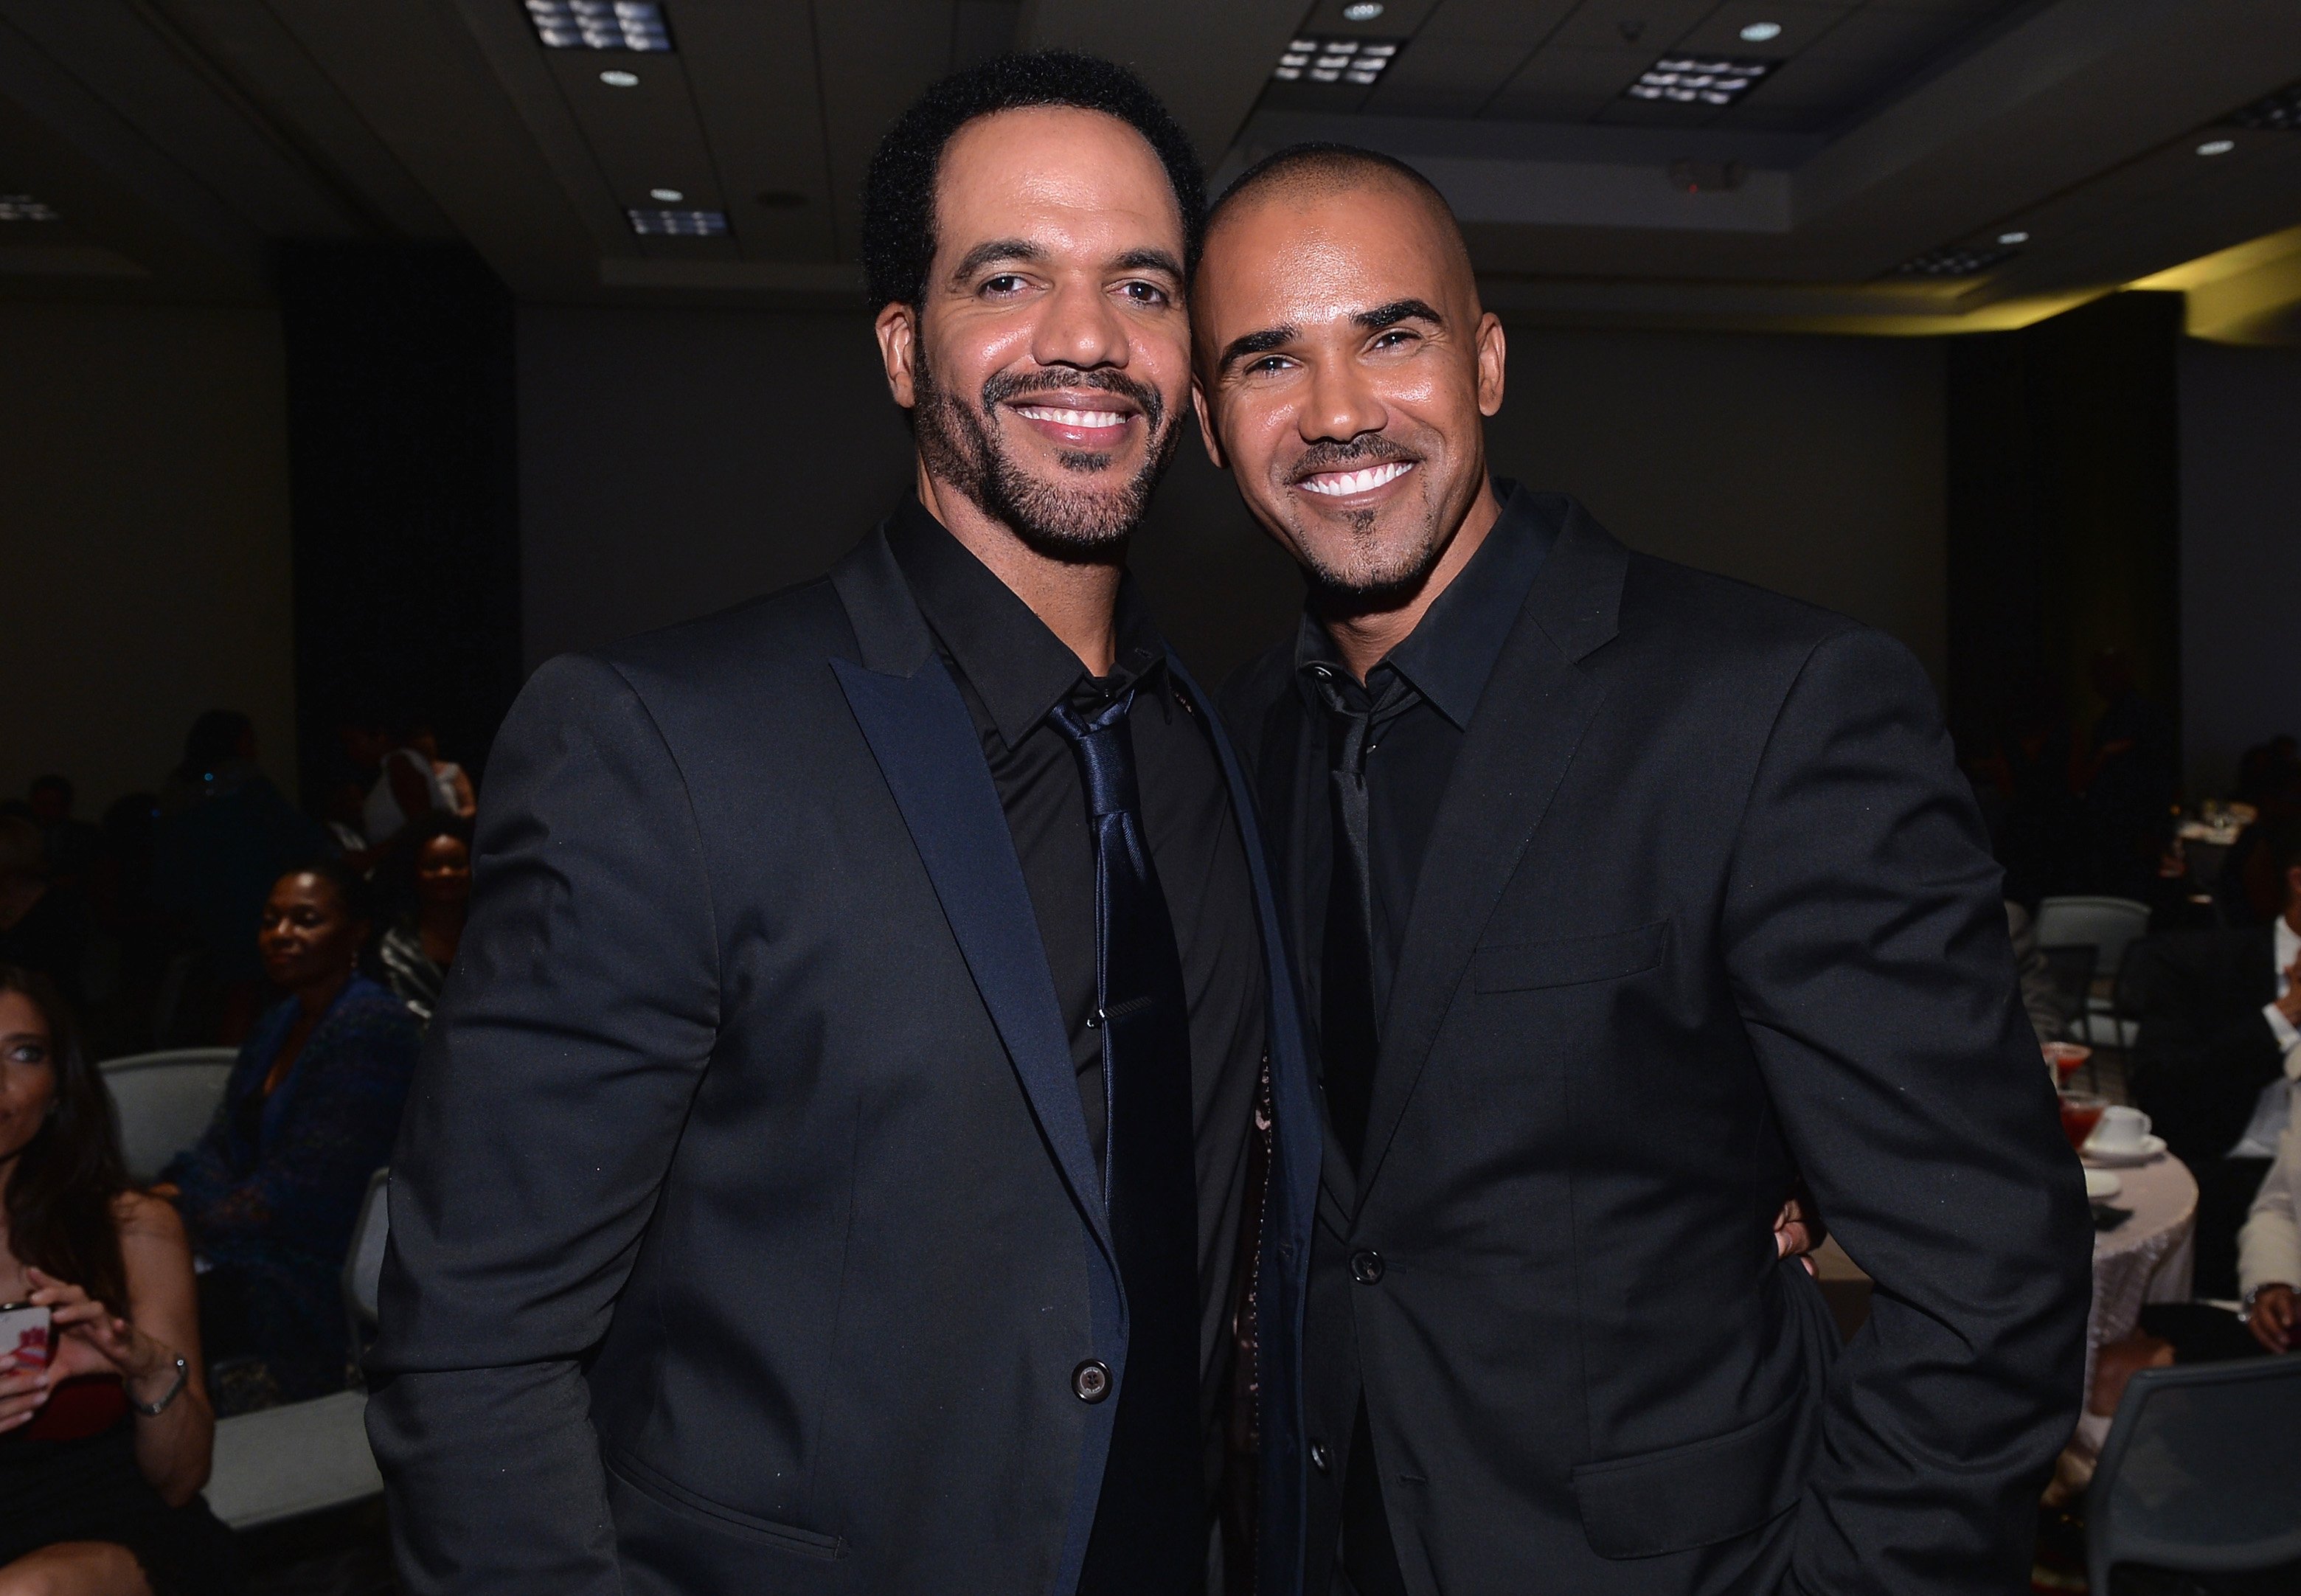  Actors Kristoff St. John and Shemar Moore attend the 45th NAACP Awards Non-Televised Awards Ceremony at the Pasadena Civic Auditorium on February 21, 2014 in Pasadena, California / Source: Getty Images 